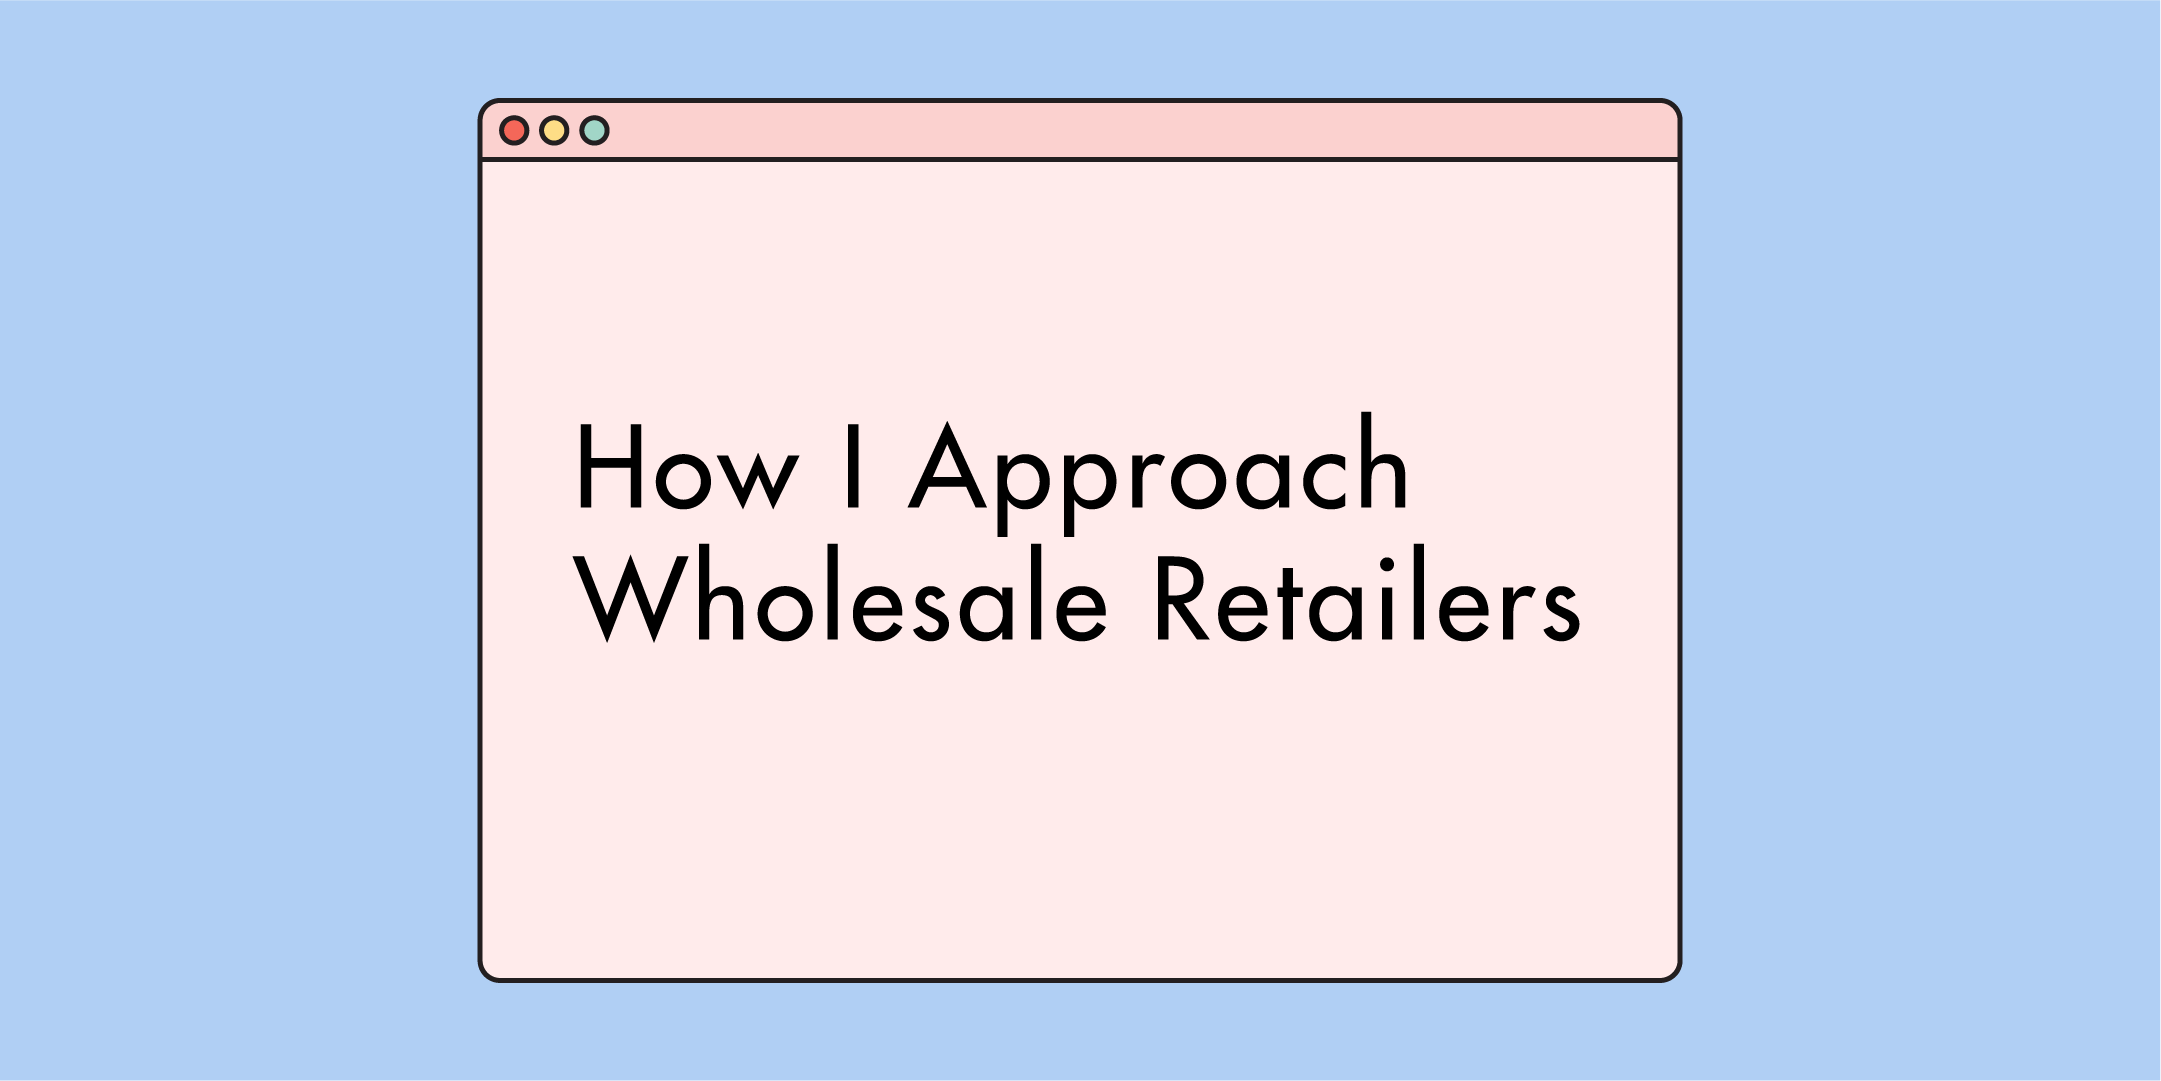 Wholesale: How I Approach Retailers